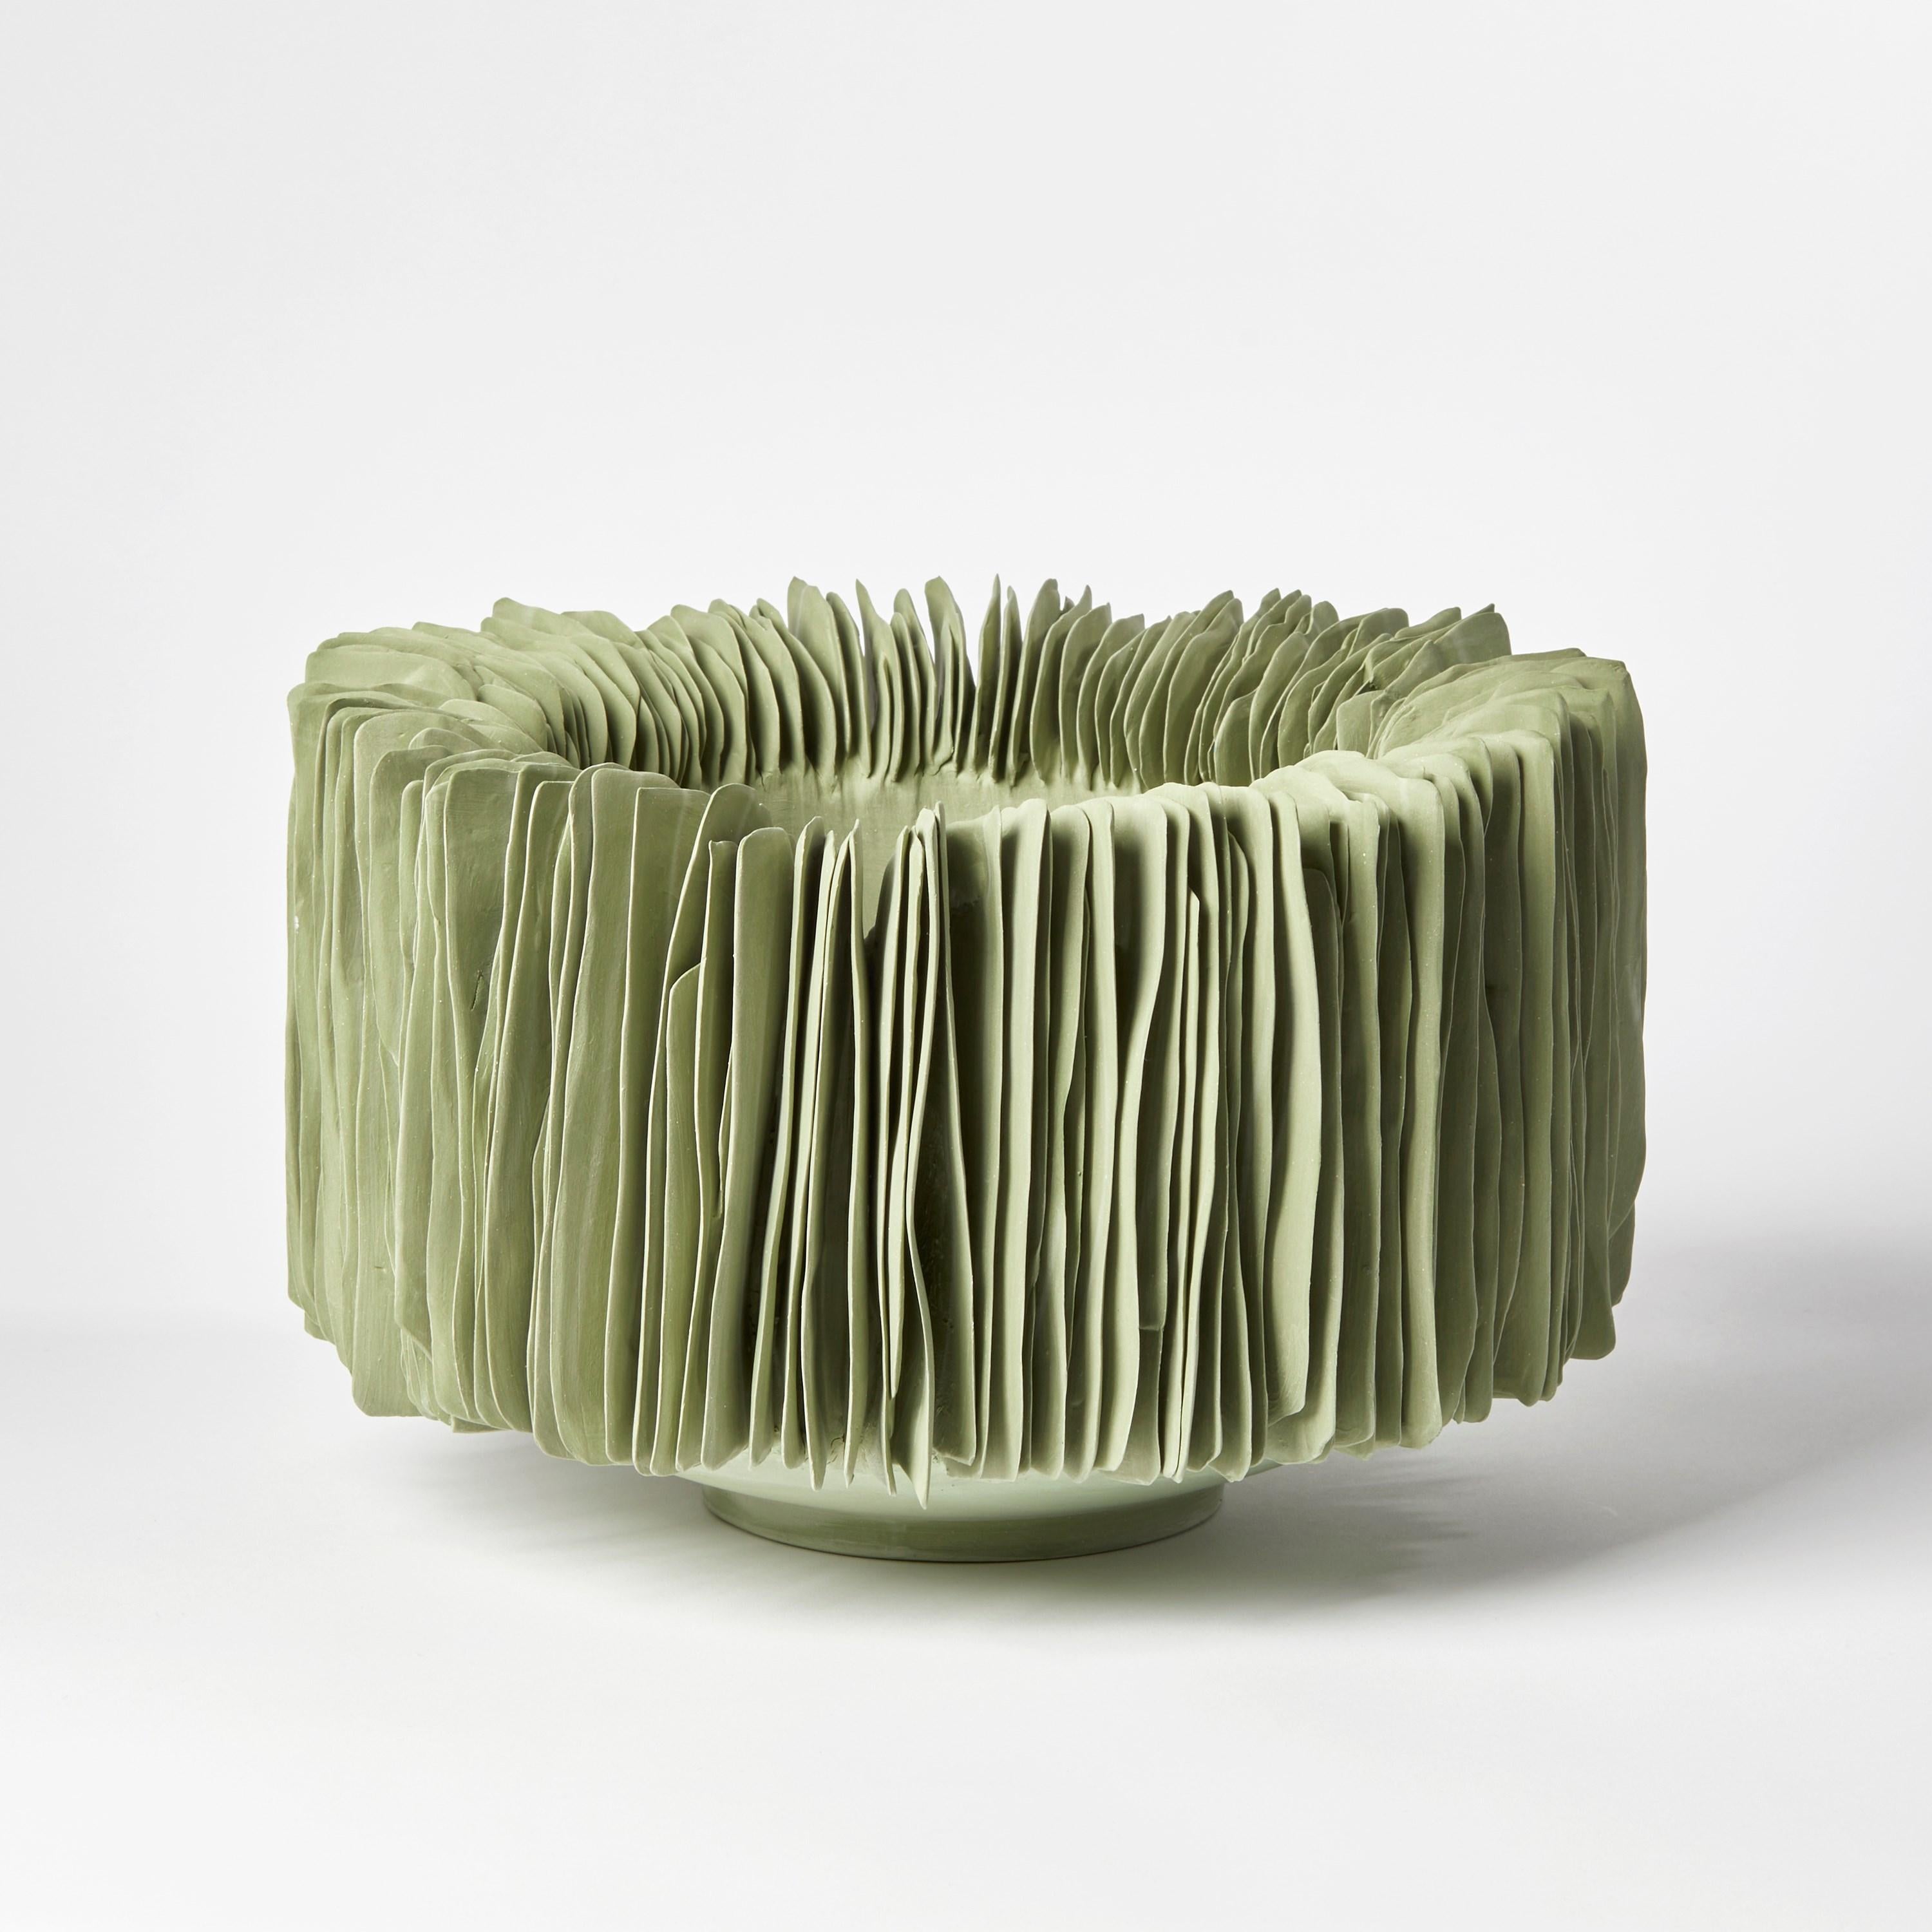 'Wide vertical bowl in olive green' is a unique porcelain sculptural bowl by the British artist, Olivia Walker.

Walker works in porcelain to create pieces that explore ideas of growth and decay through the construction and layering of complex